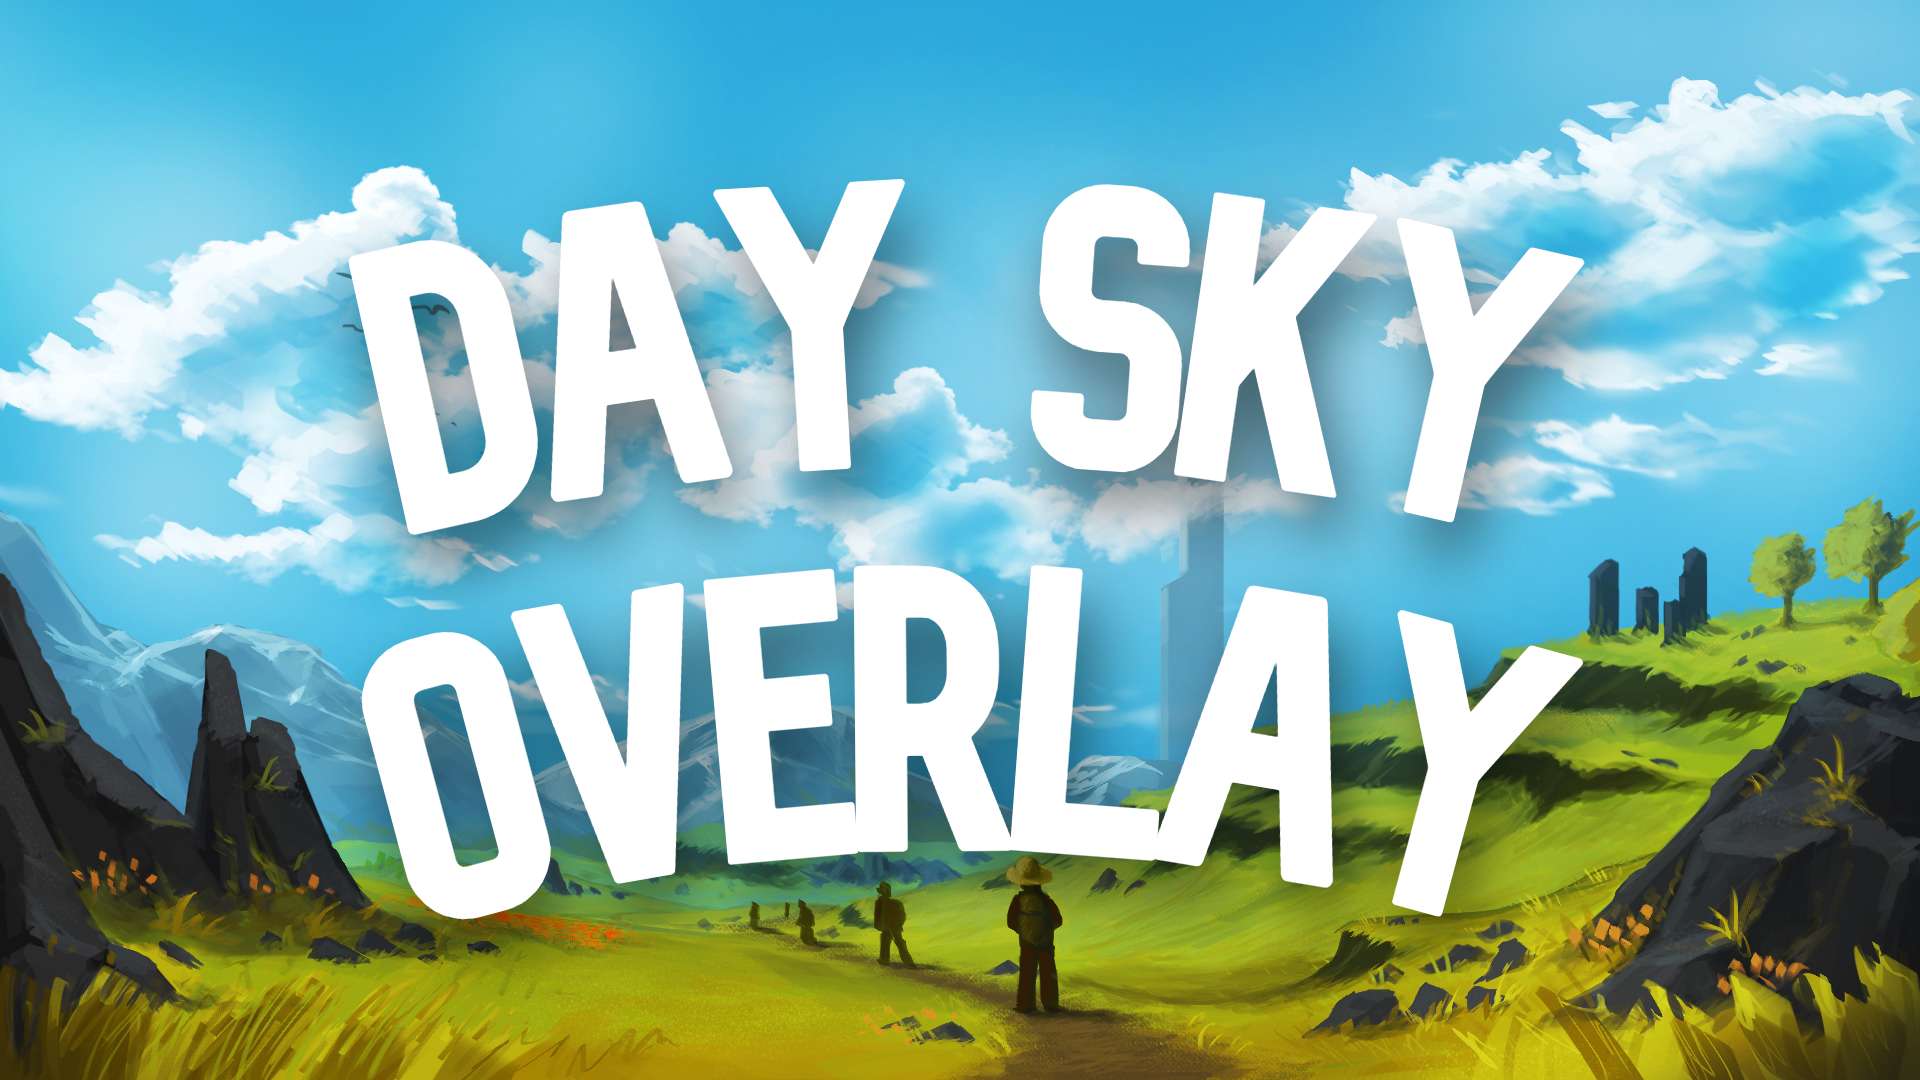 Gallery Banner for Day Sky Overlay #15 on PvPRP